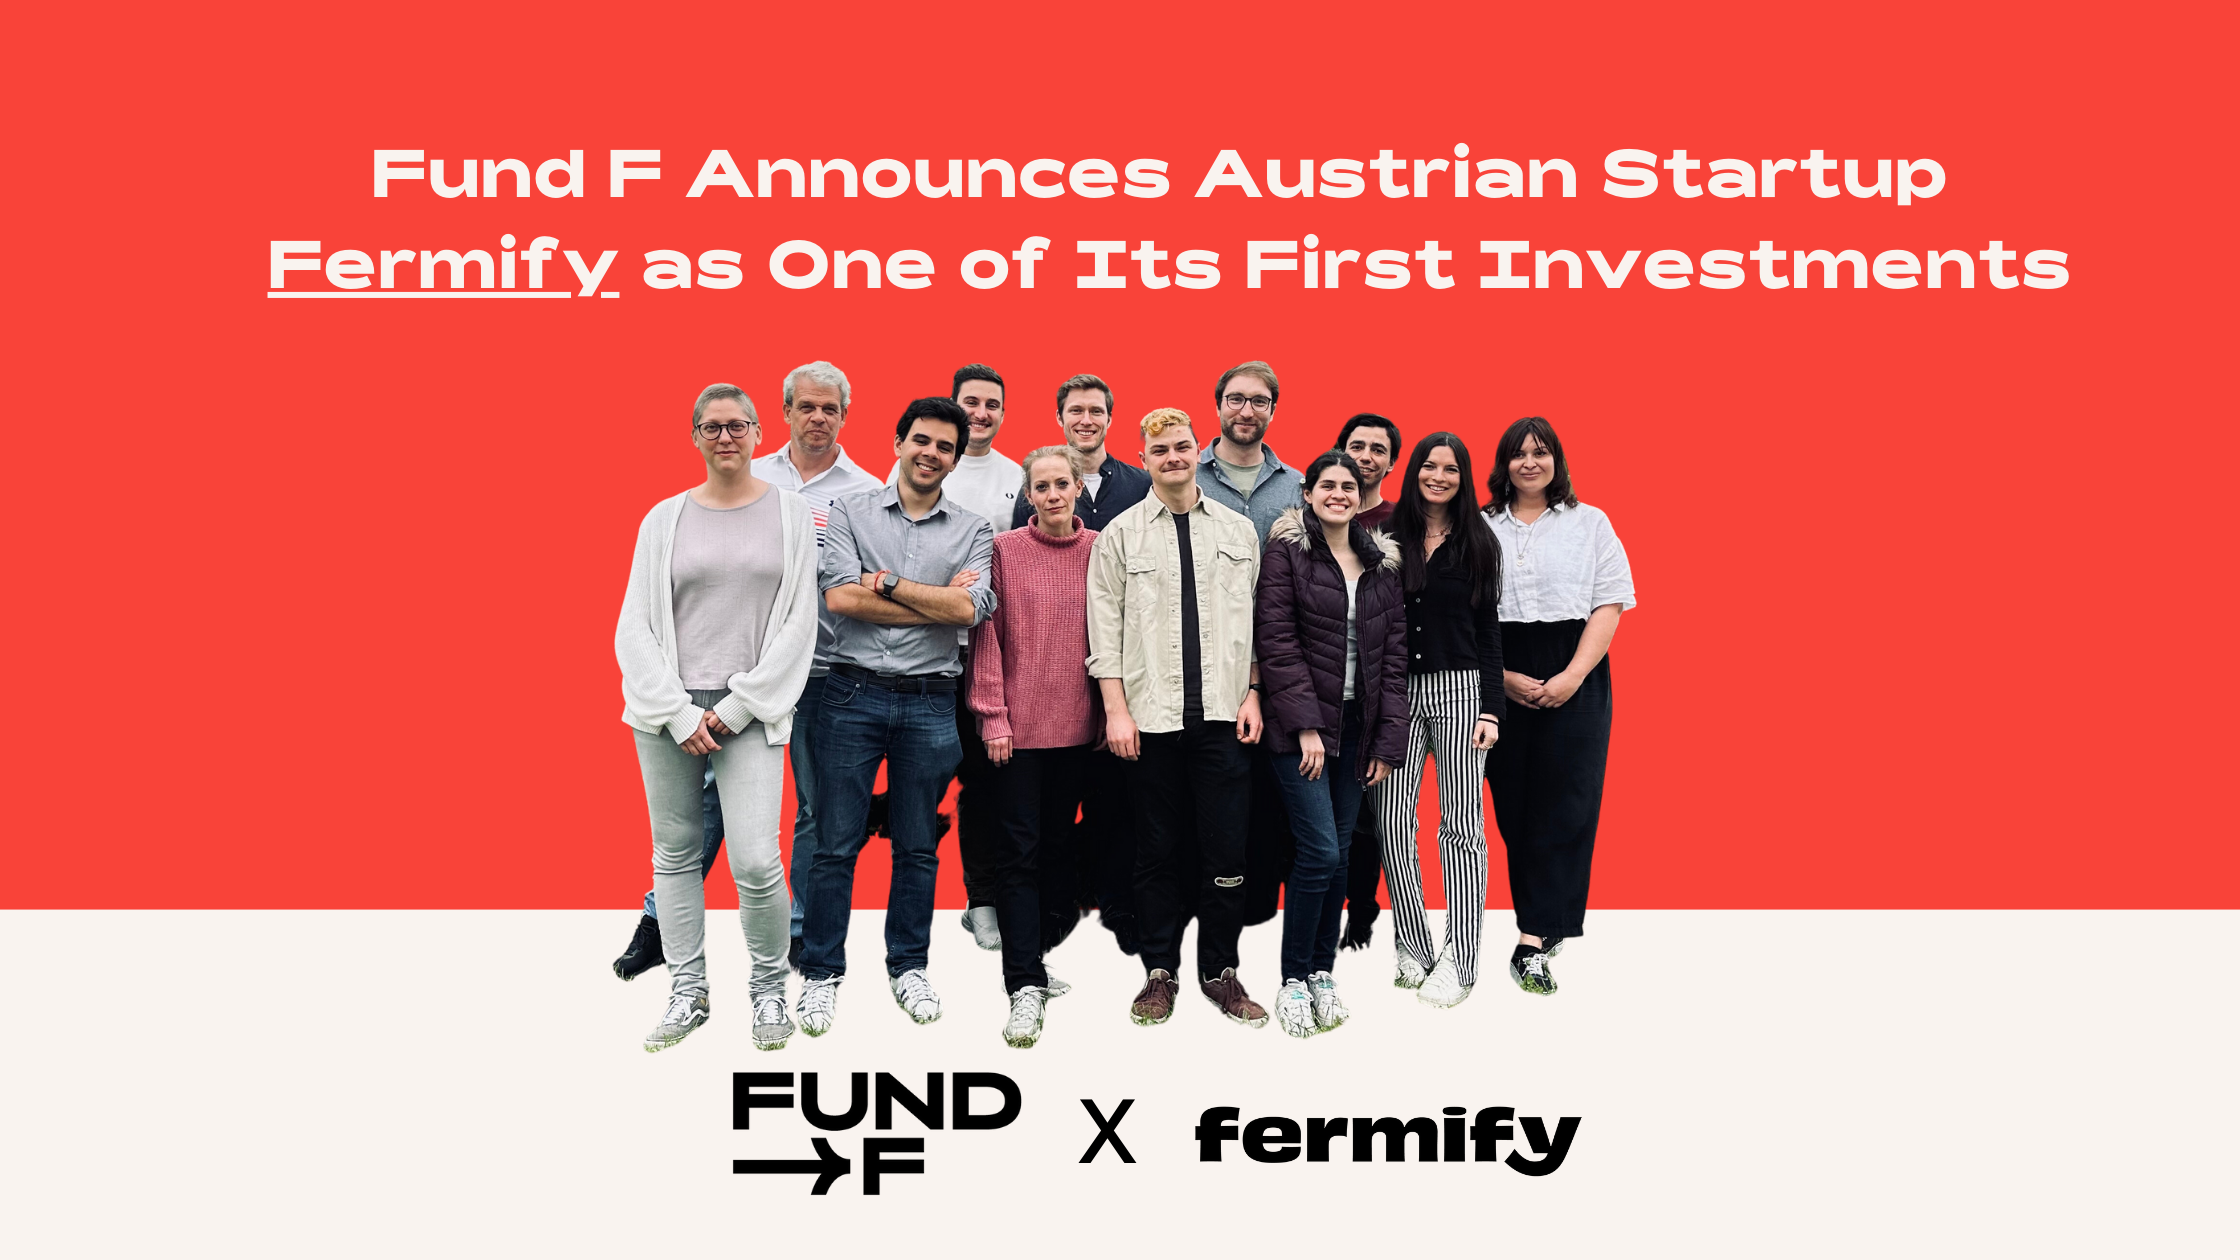 FERMIFY Secures $5 Million in Female-Led Seed Funding - And Female Foundersâ€™ Fund F is One of the Investors ðŸŽ‰